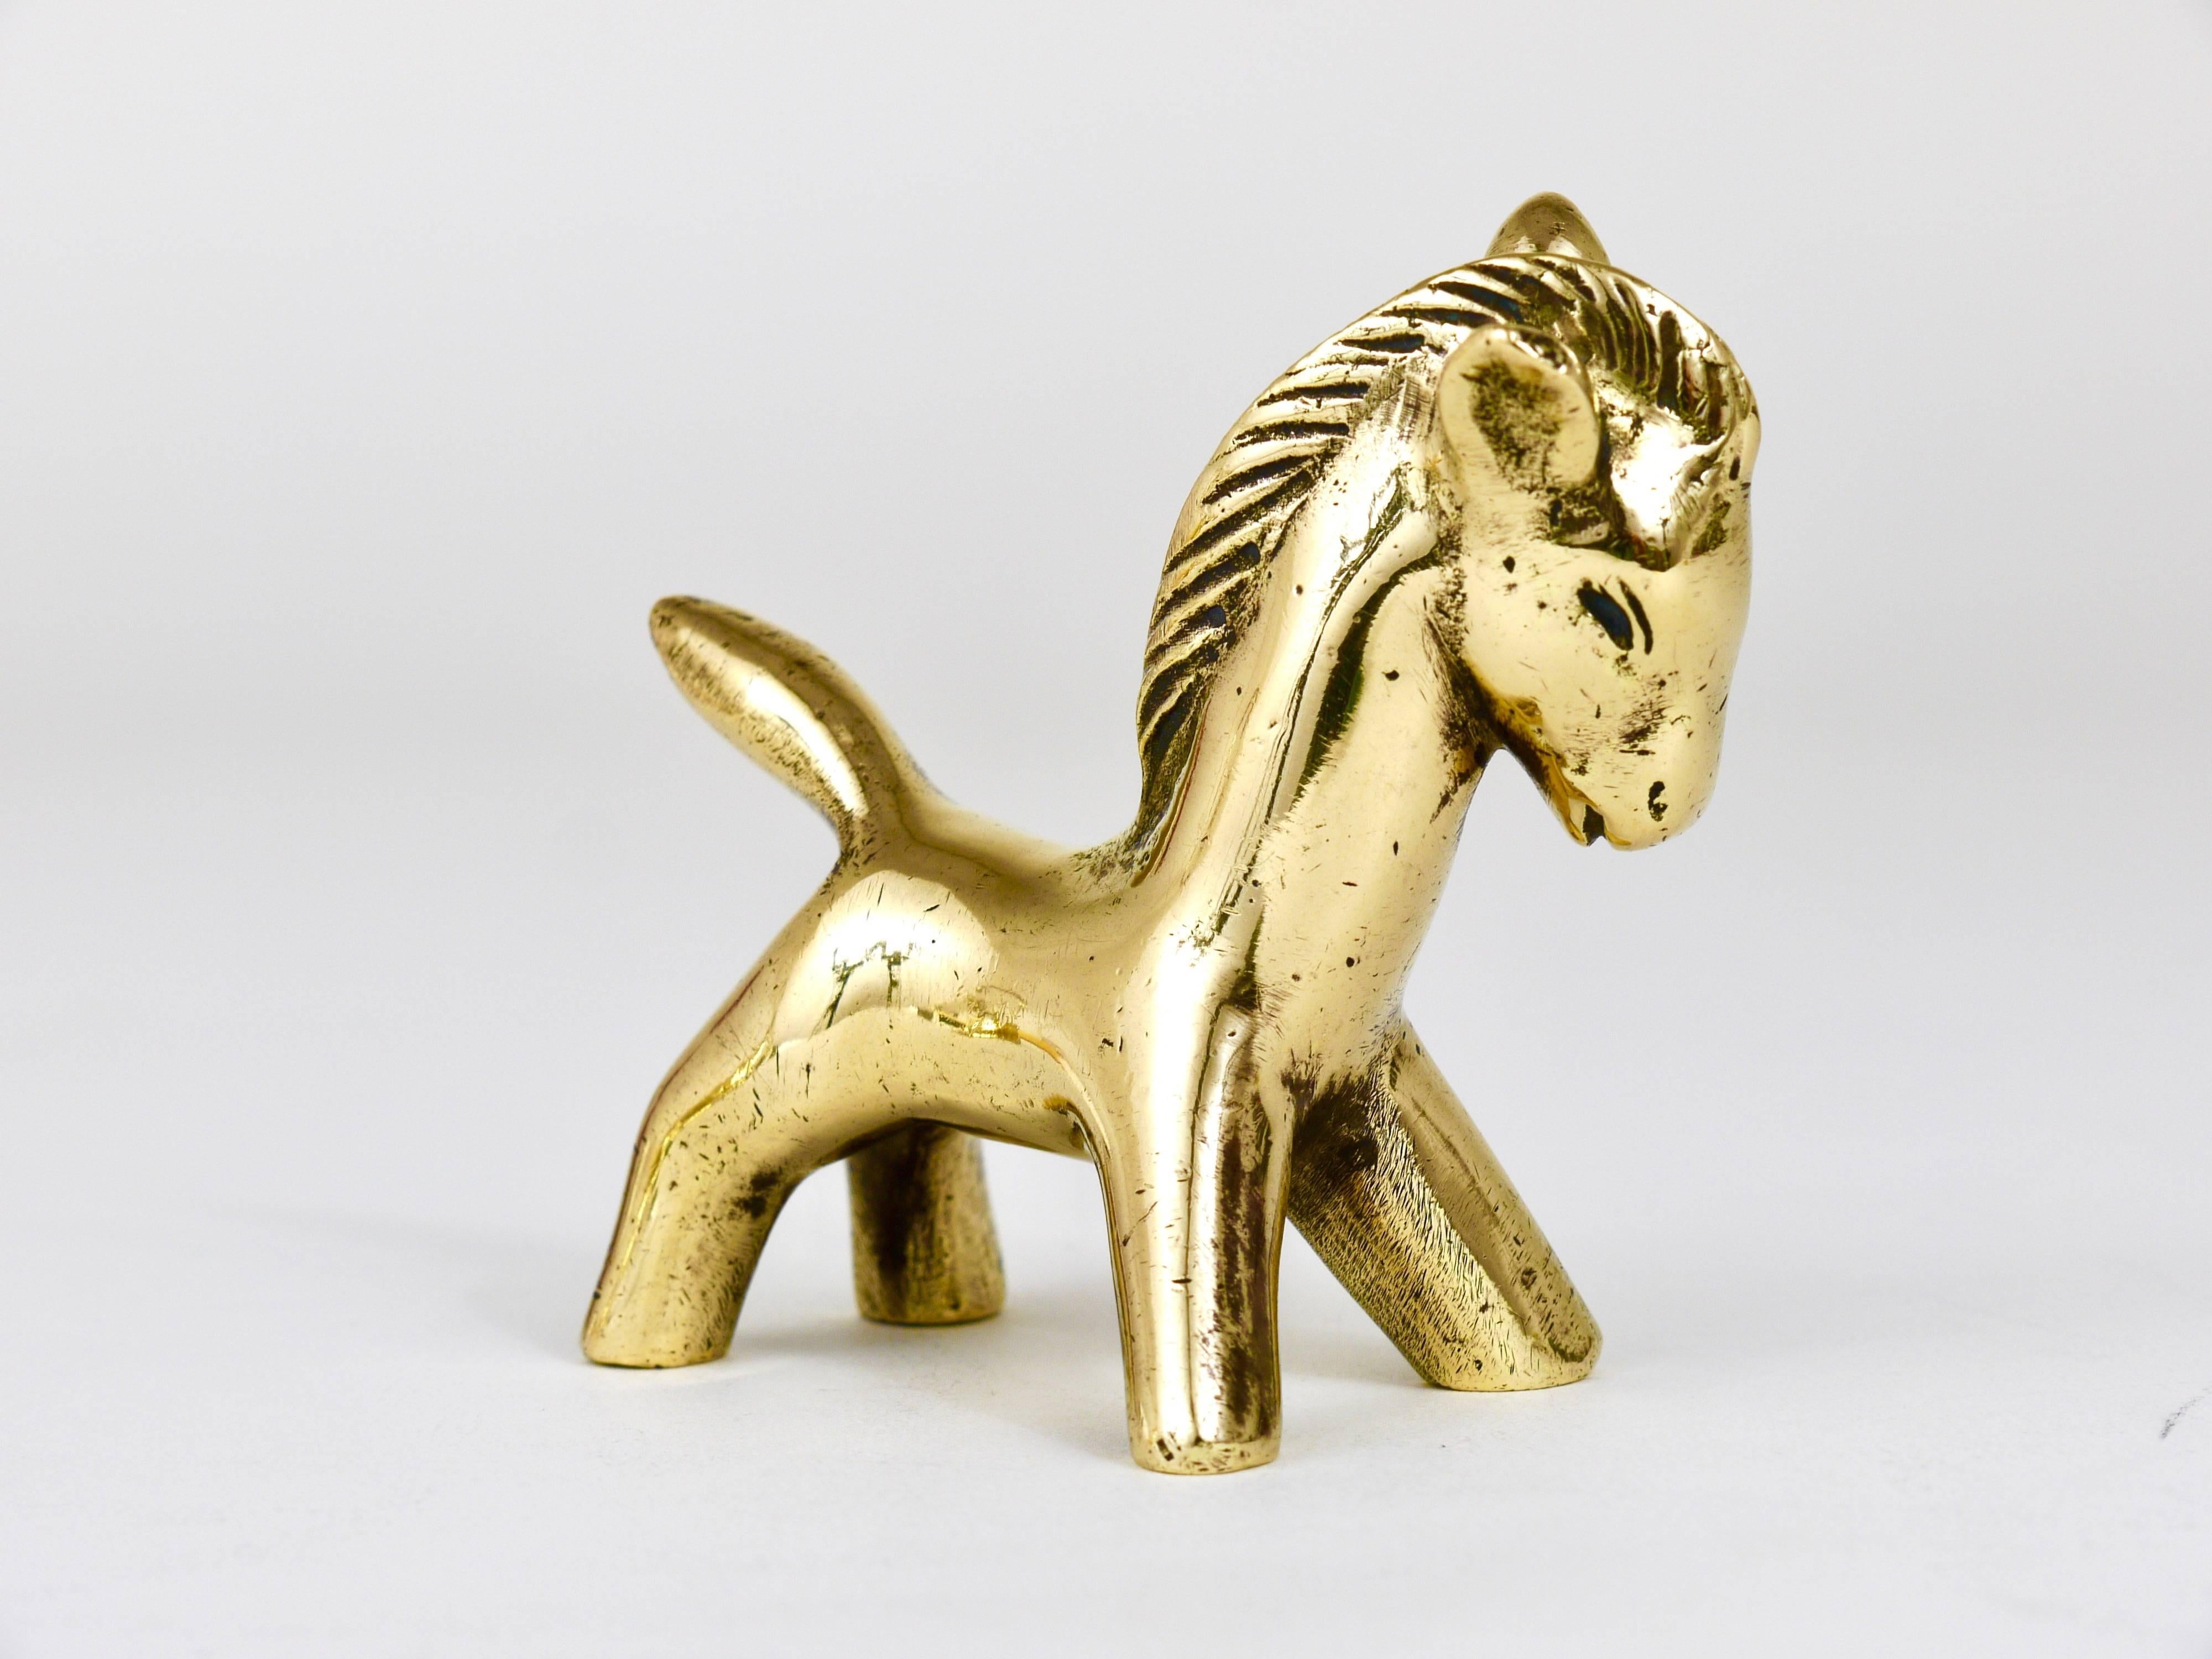 A lovely horse foal sculpture made of brass from the 1950s. Designed by Walter Bosse, executed by Hertha Baller. In good condition with charming patina. We offer more Walter Bosse brass objects in our other listings.